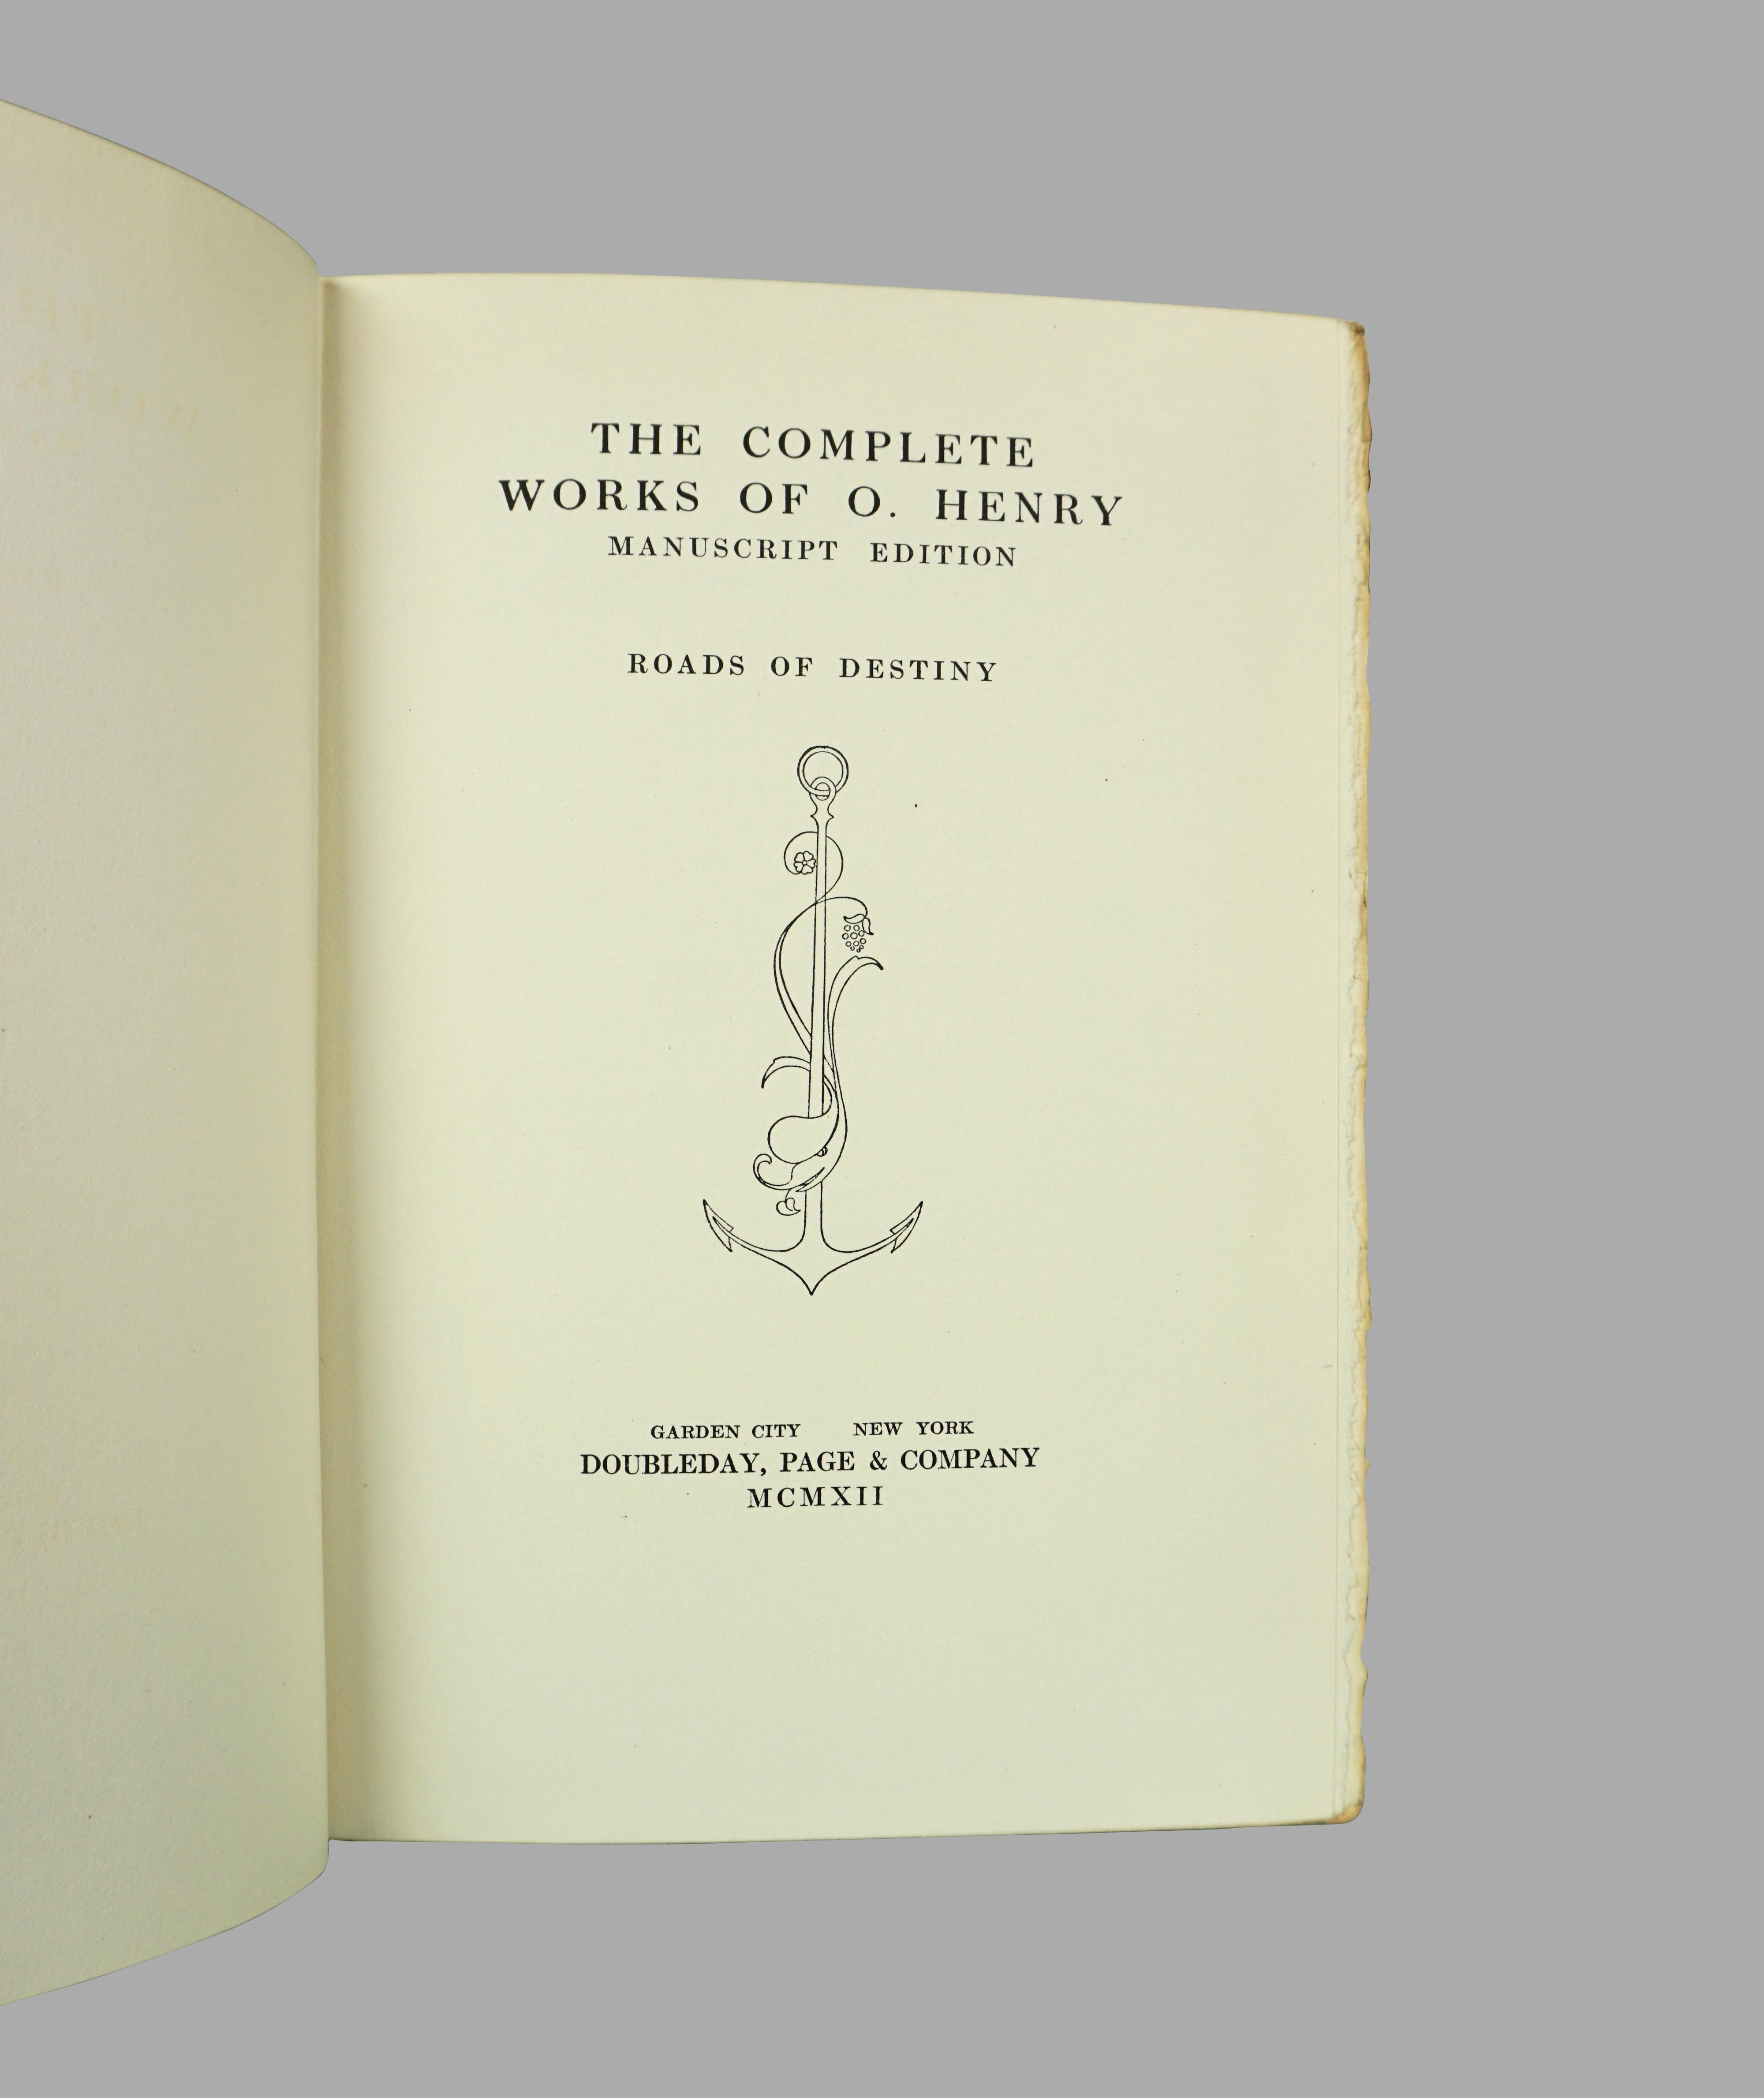 American The Complete Works of O. Henry, Manuscript Edition Limited to 125 Copies For Sale